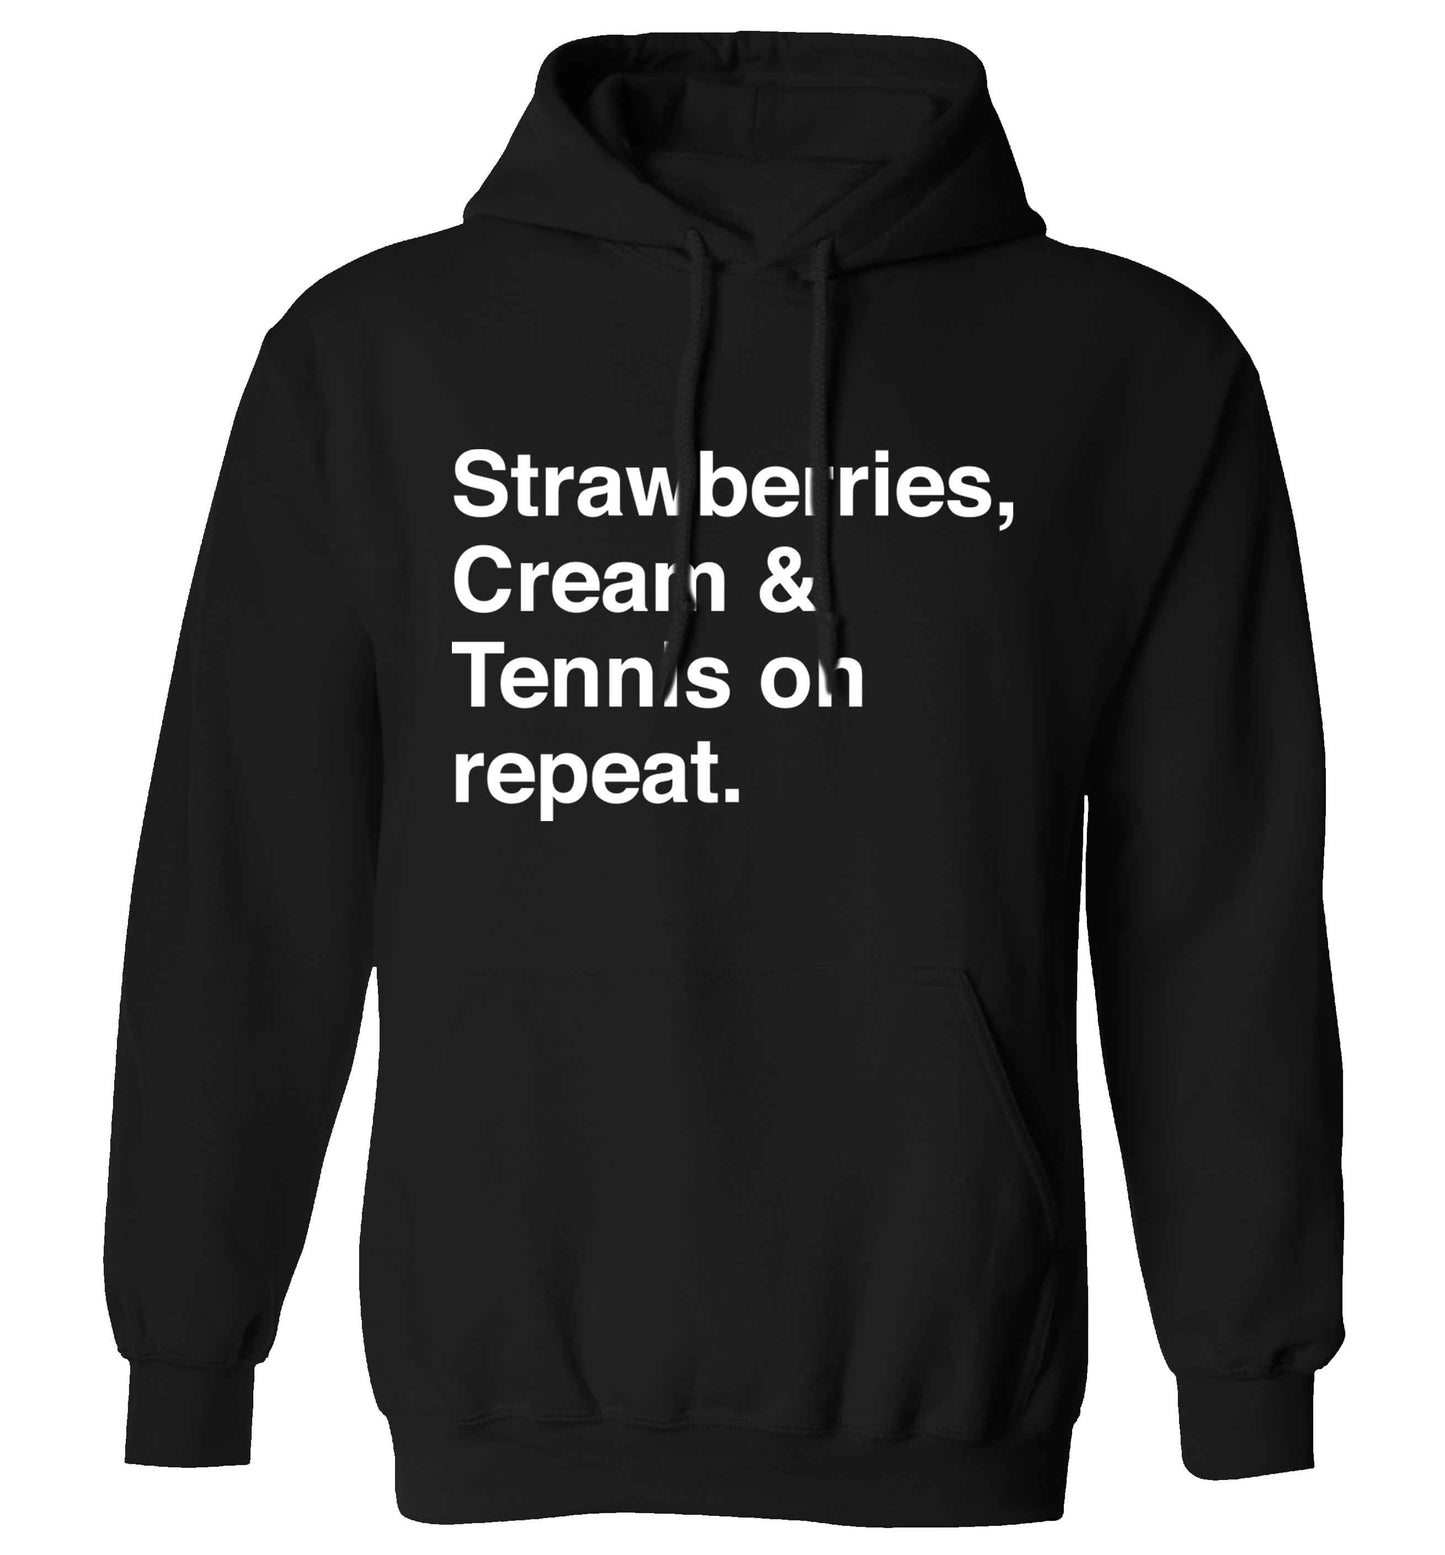 Strawberries, cream and tennis on repeat adults unisex black hoodie 2XL